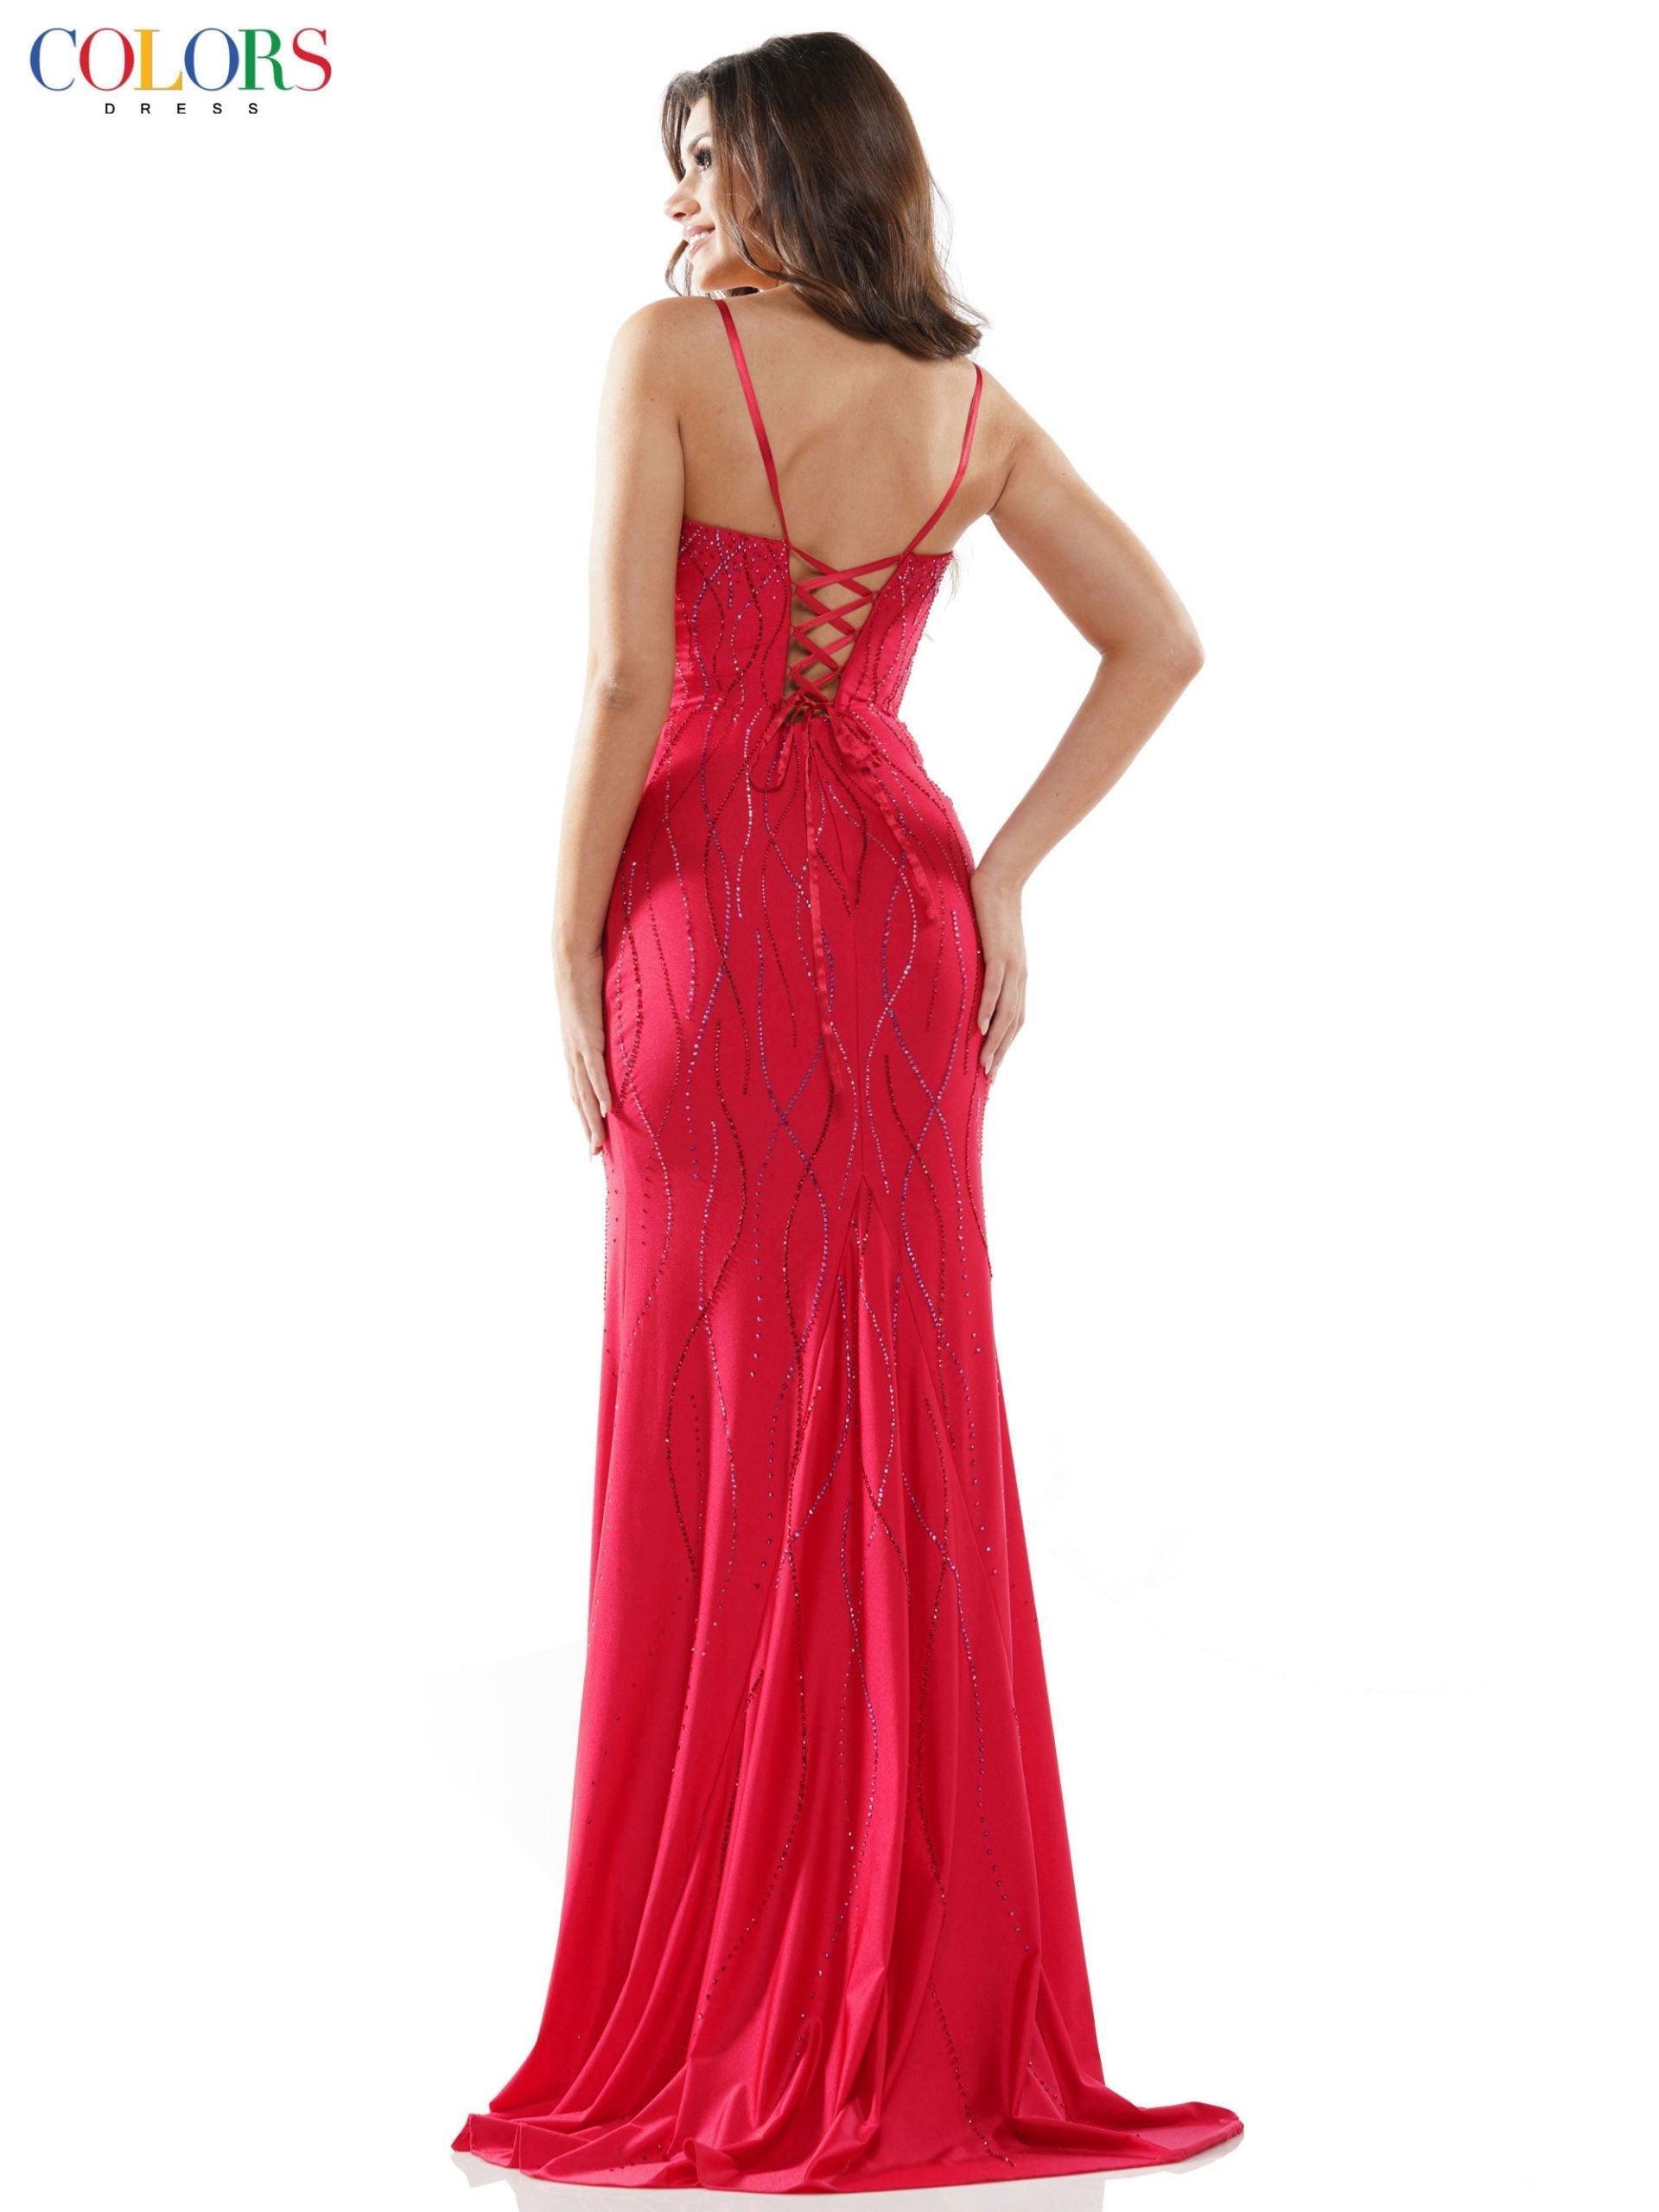 Colors Formal Long Spaghetti Strap Dress G1052 - The Dress Outlet